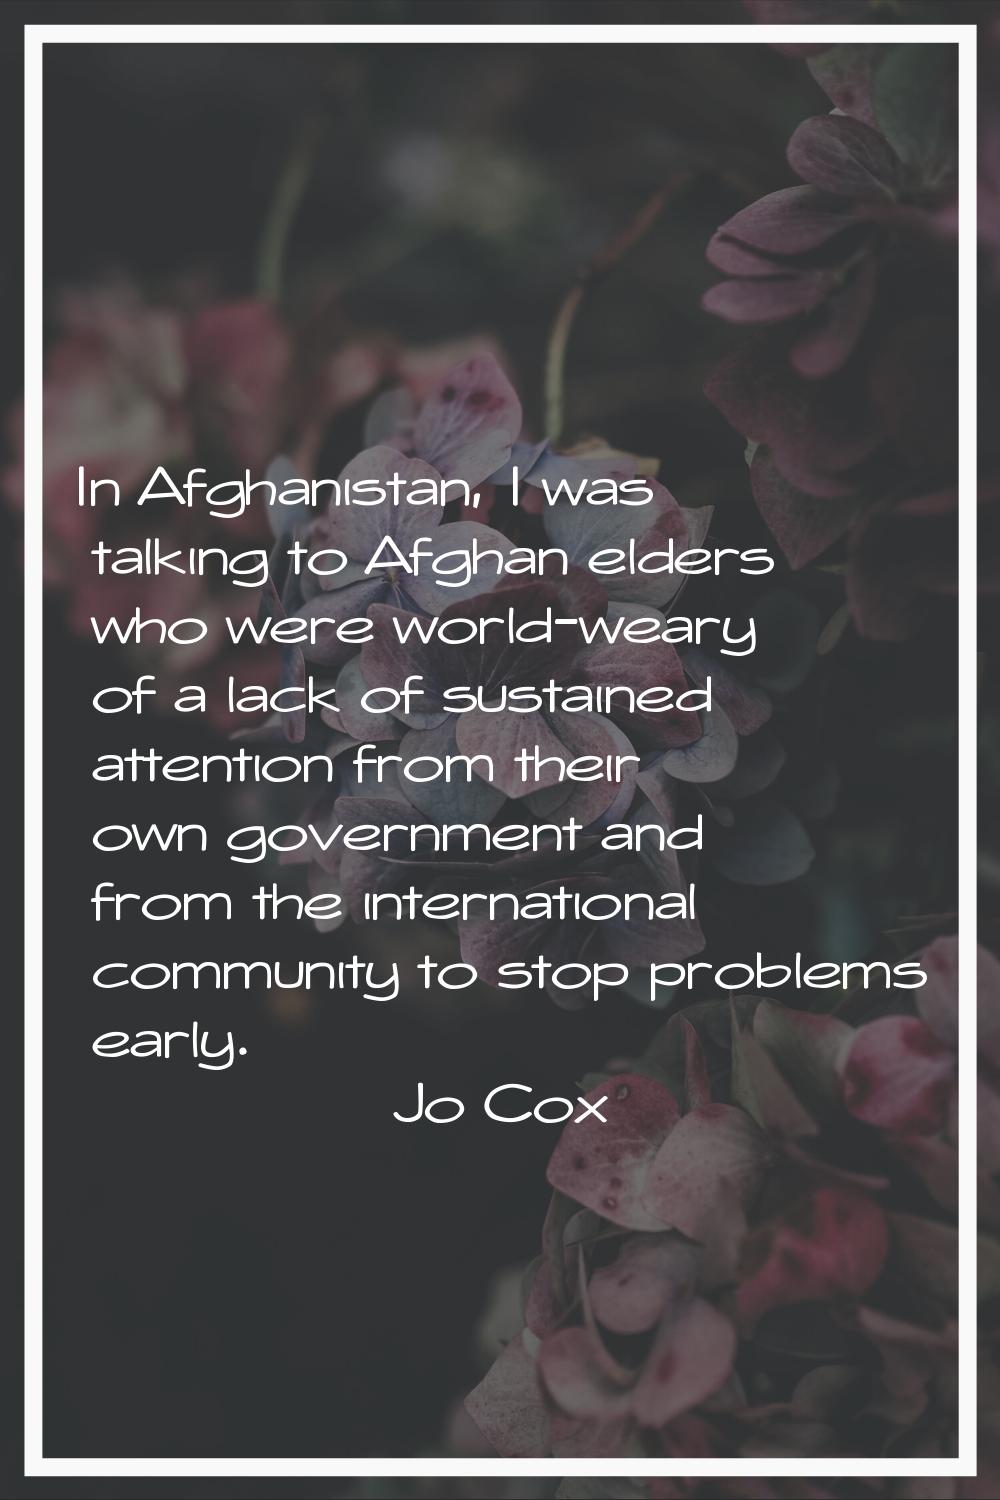 In Afghanistan, I was talking to Afghan elders who were world-weary of a lack of sustained attentio